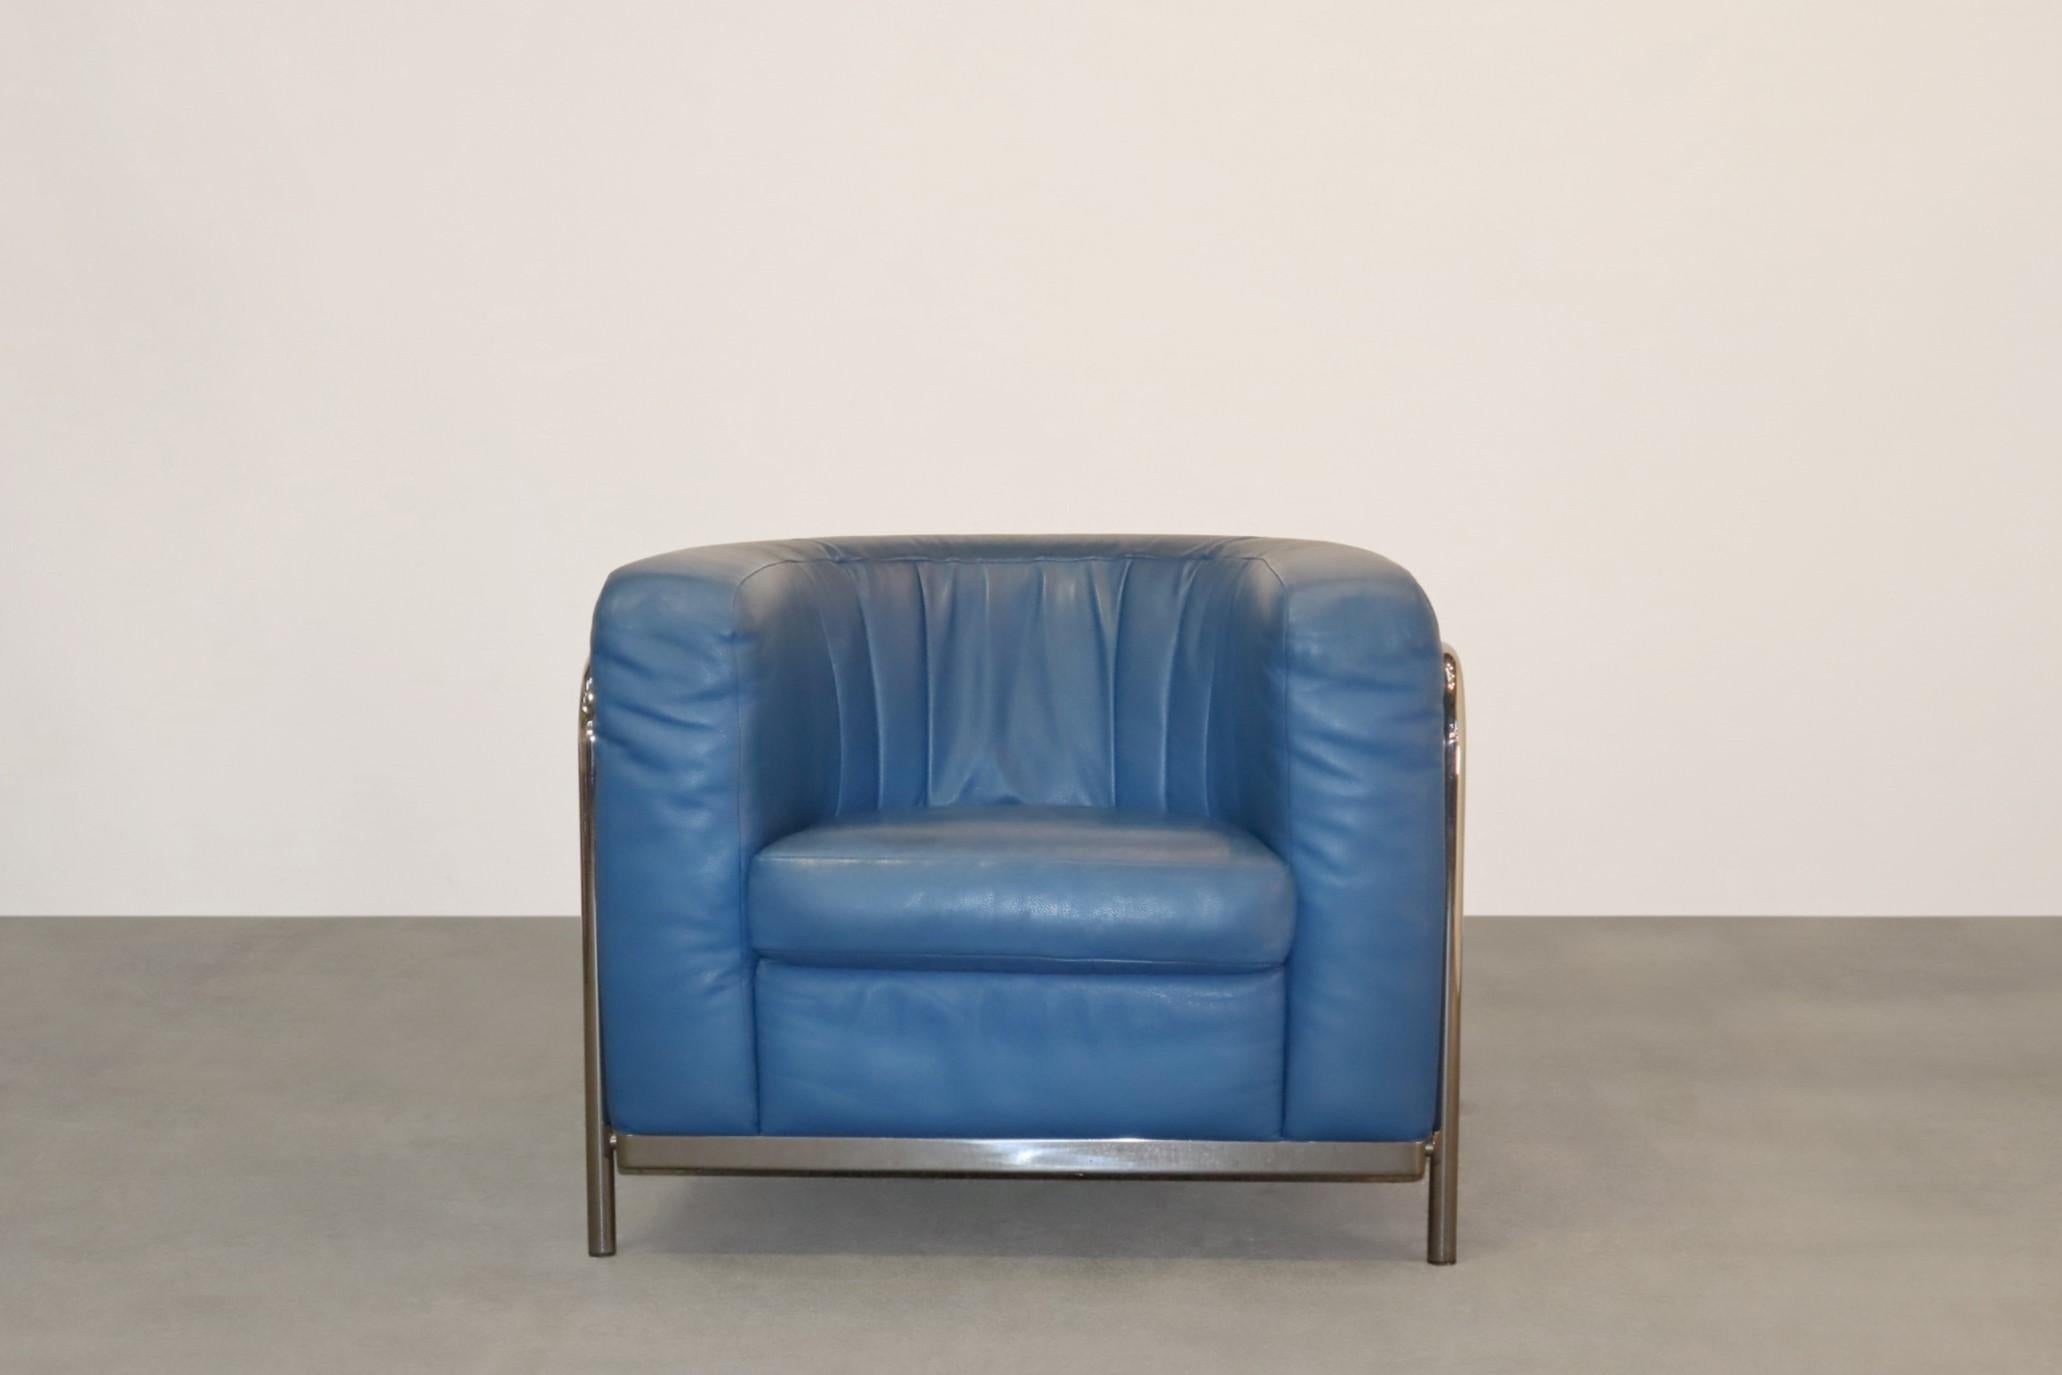 Post-Modern Zanotta Onda Pair of Armchairs in Blue Leather by De Pas, D'urbino For Sale